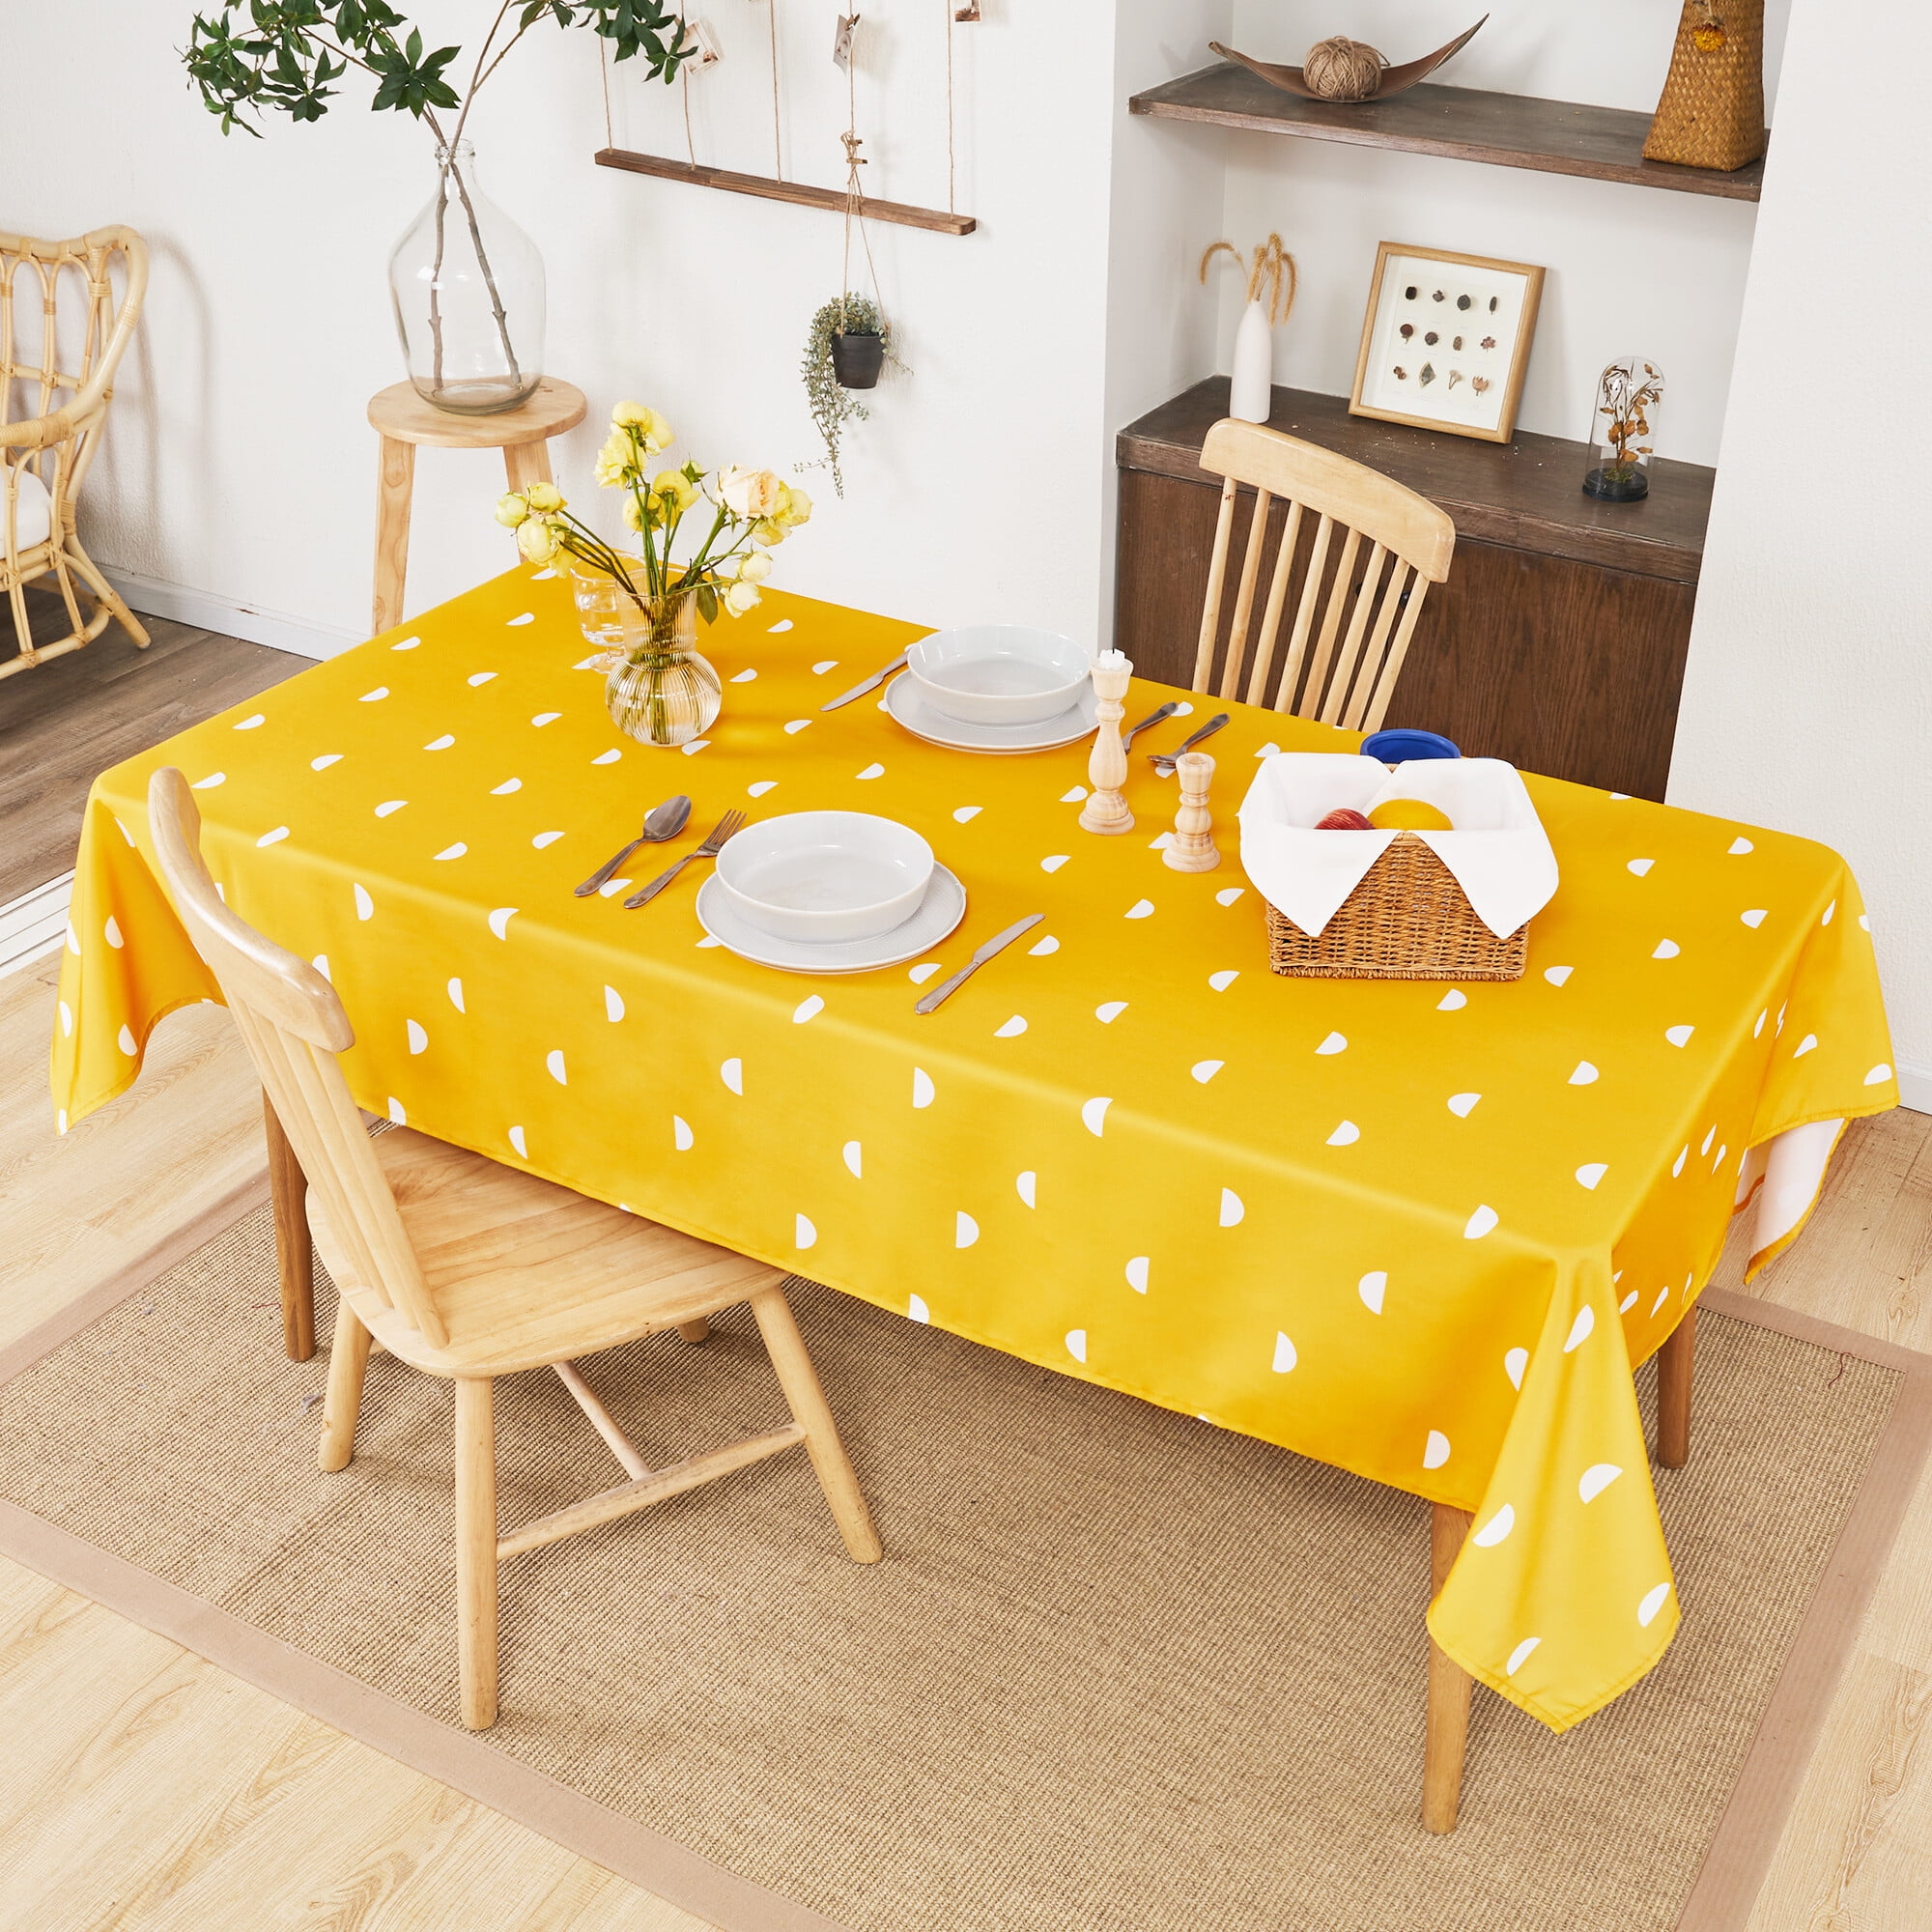 Indoor/Outdoor Tablecloth for Picnic Barbeque Gold Milano Marble Solid Color Print Heavy Gauge Vinyl Flannel Backed Tablecloth Patio and Kitchen Dining, 60 Inch x 102 Inch Oblong/Rectangle 